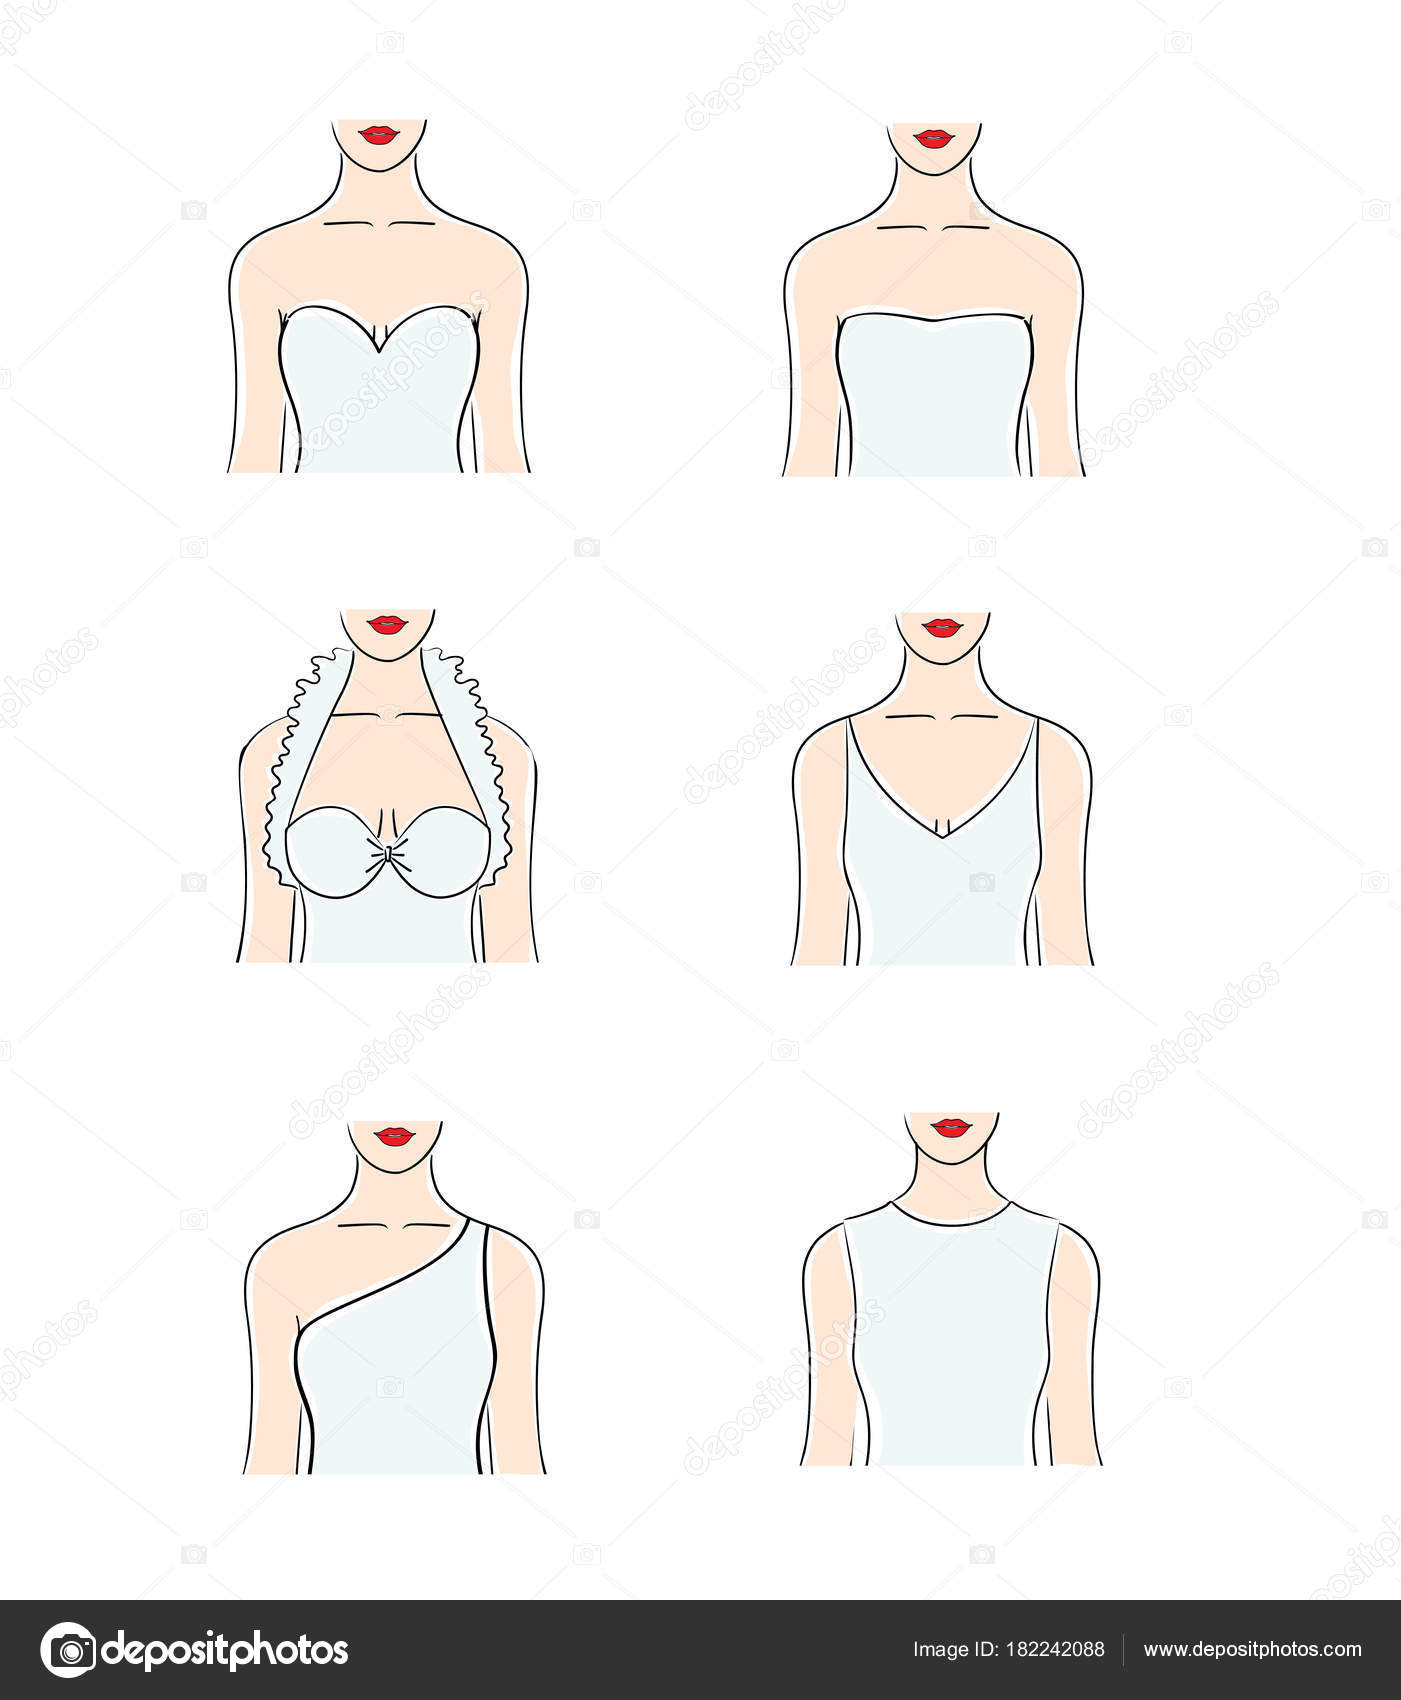 Necklines - the complete illustrated fashion guide to women's clothing